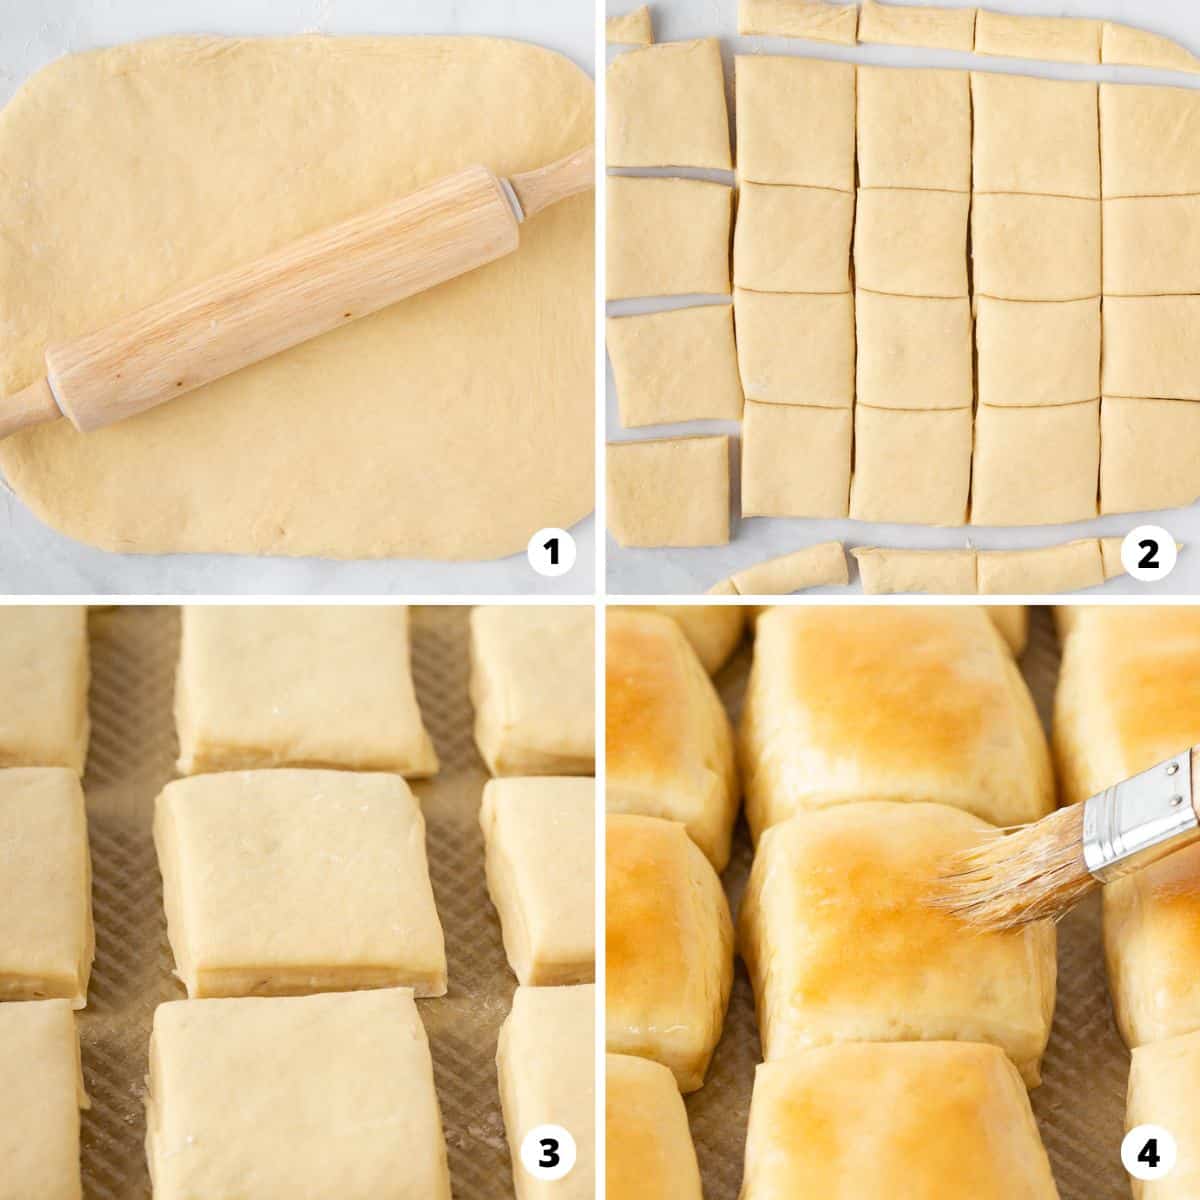 Showing how to make Texas Roadhouse Rolls in a 4 Step Collage.